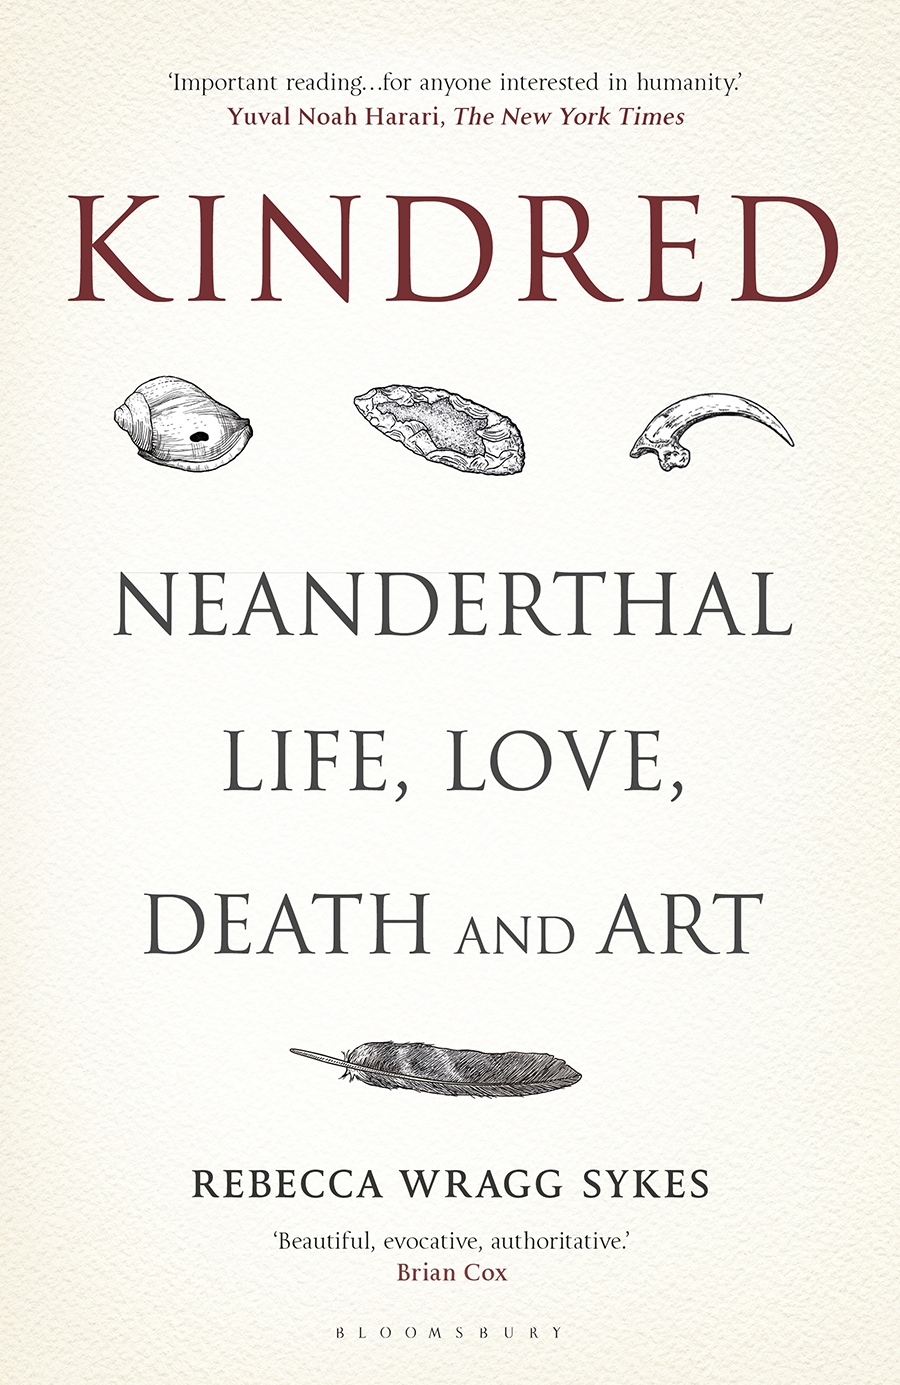 book review on kindred